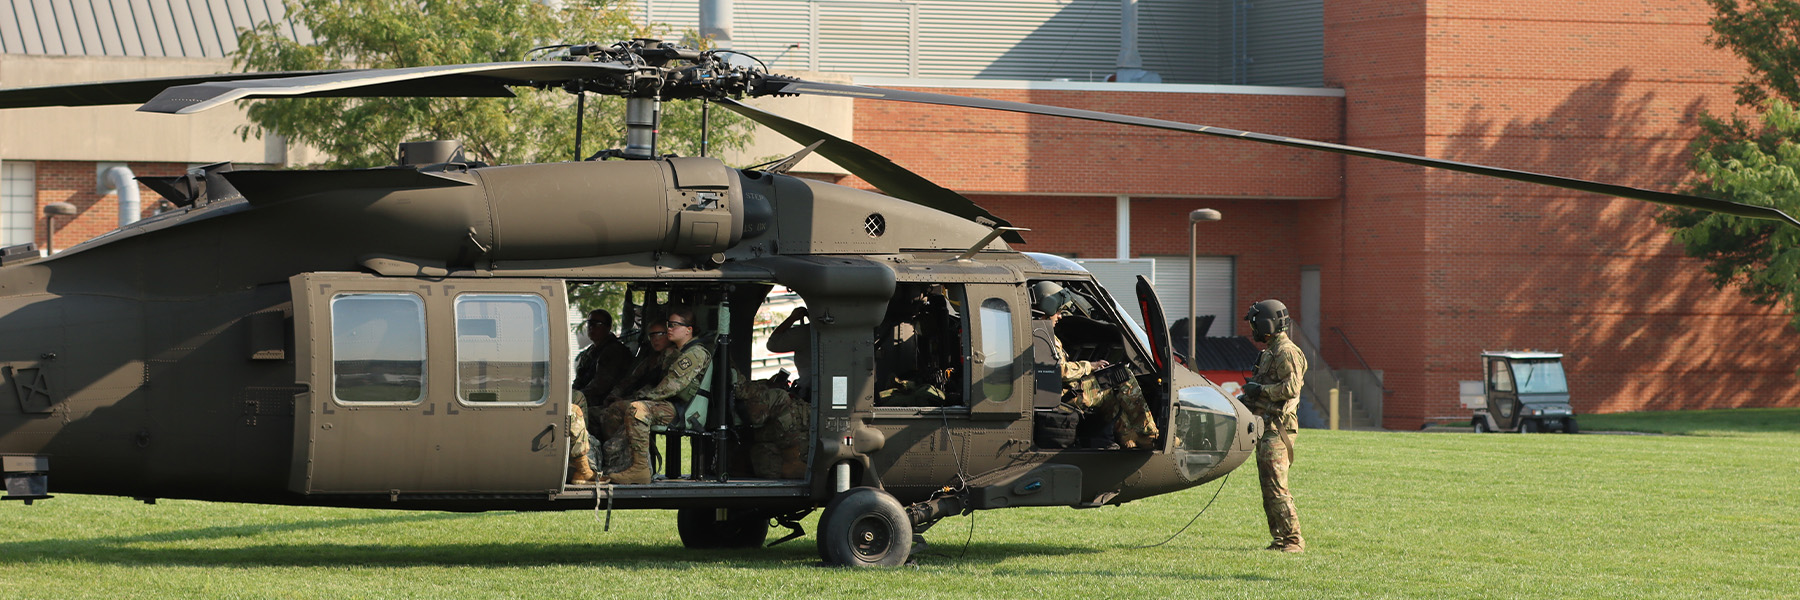 ROTC students abroad a helicopter